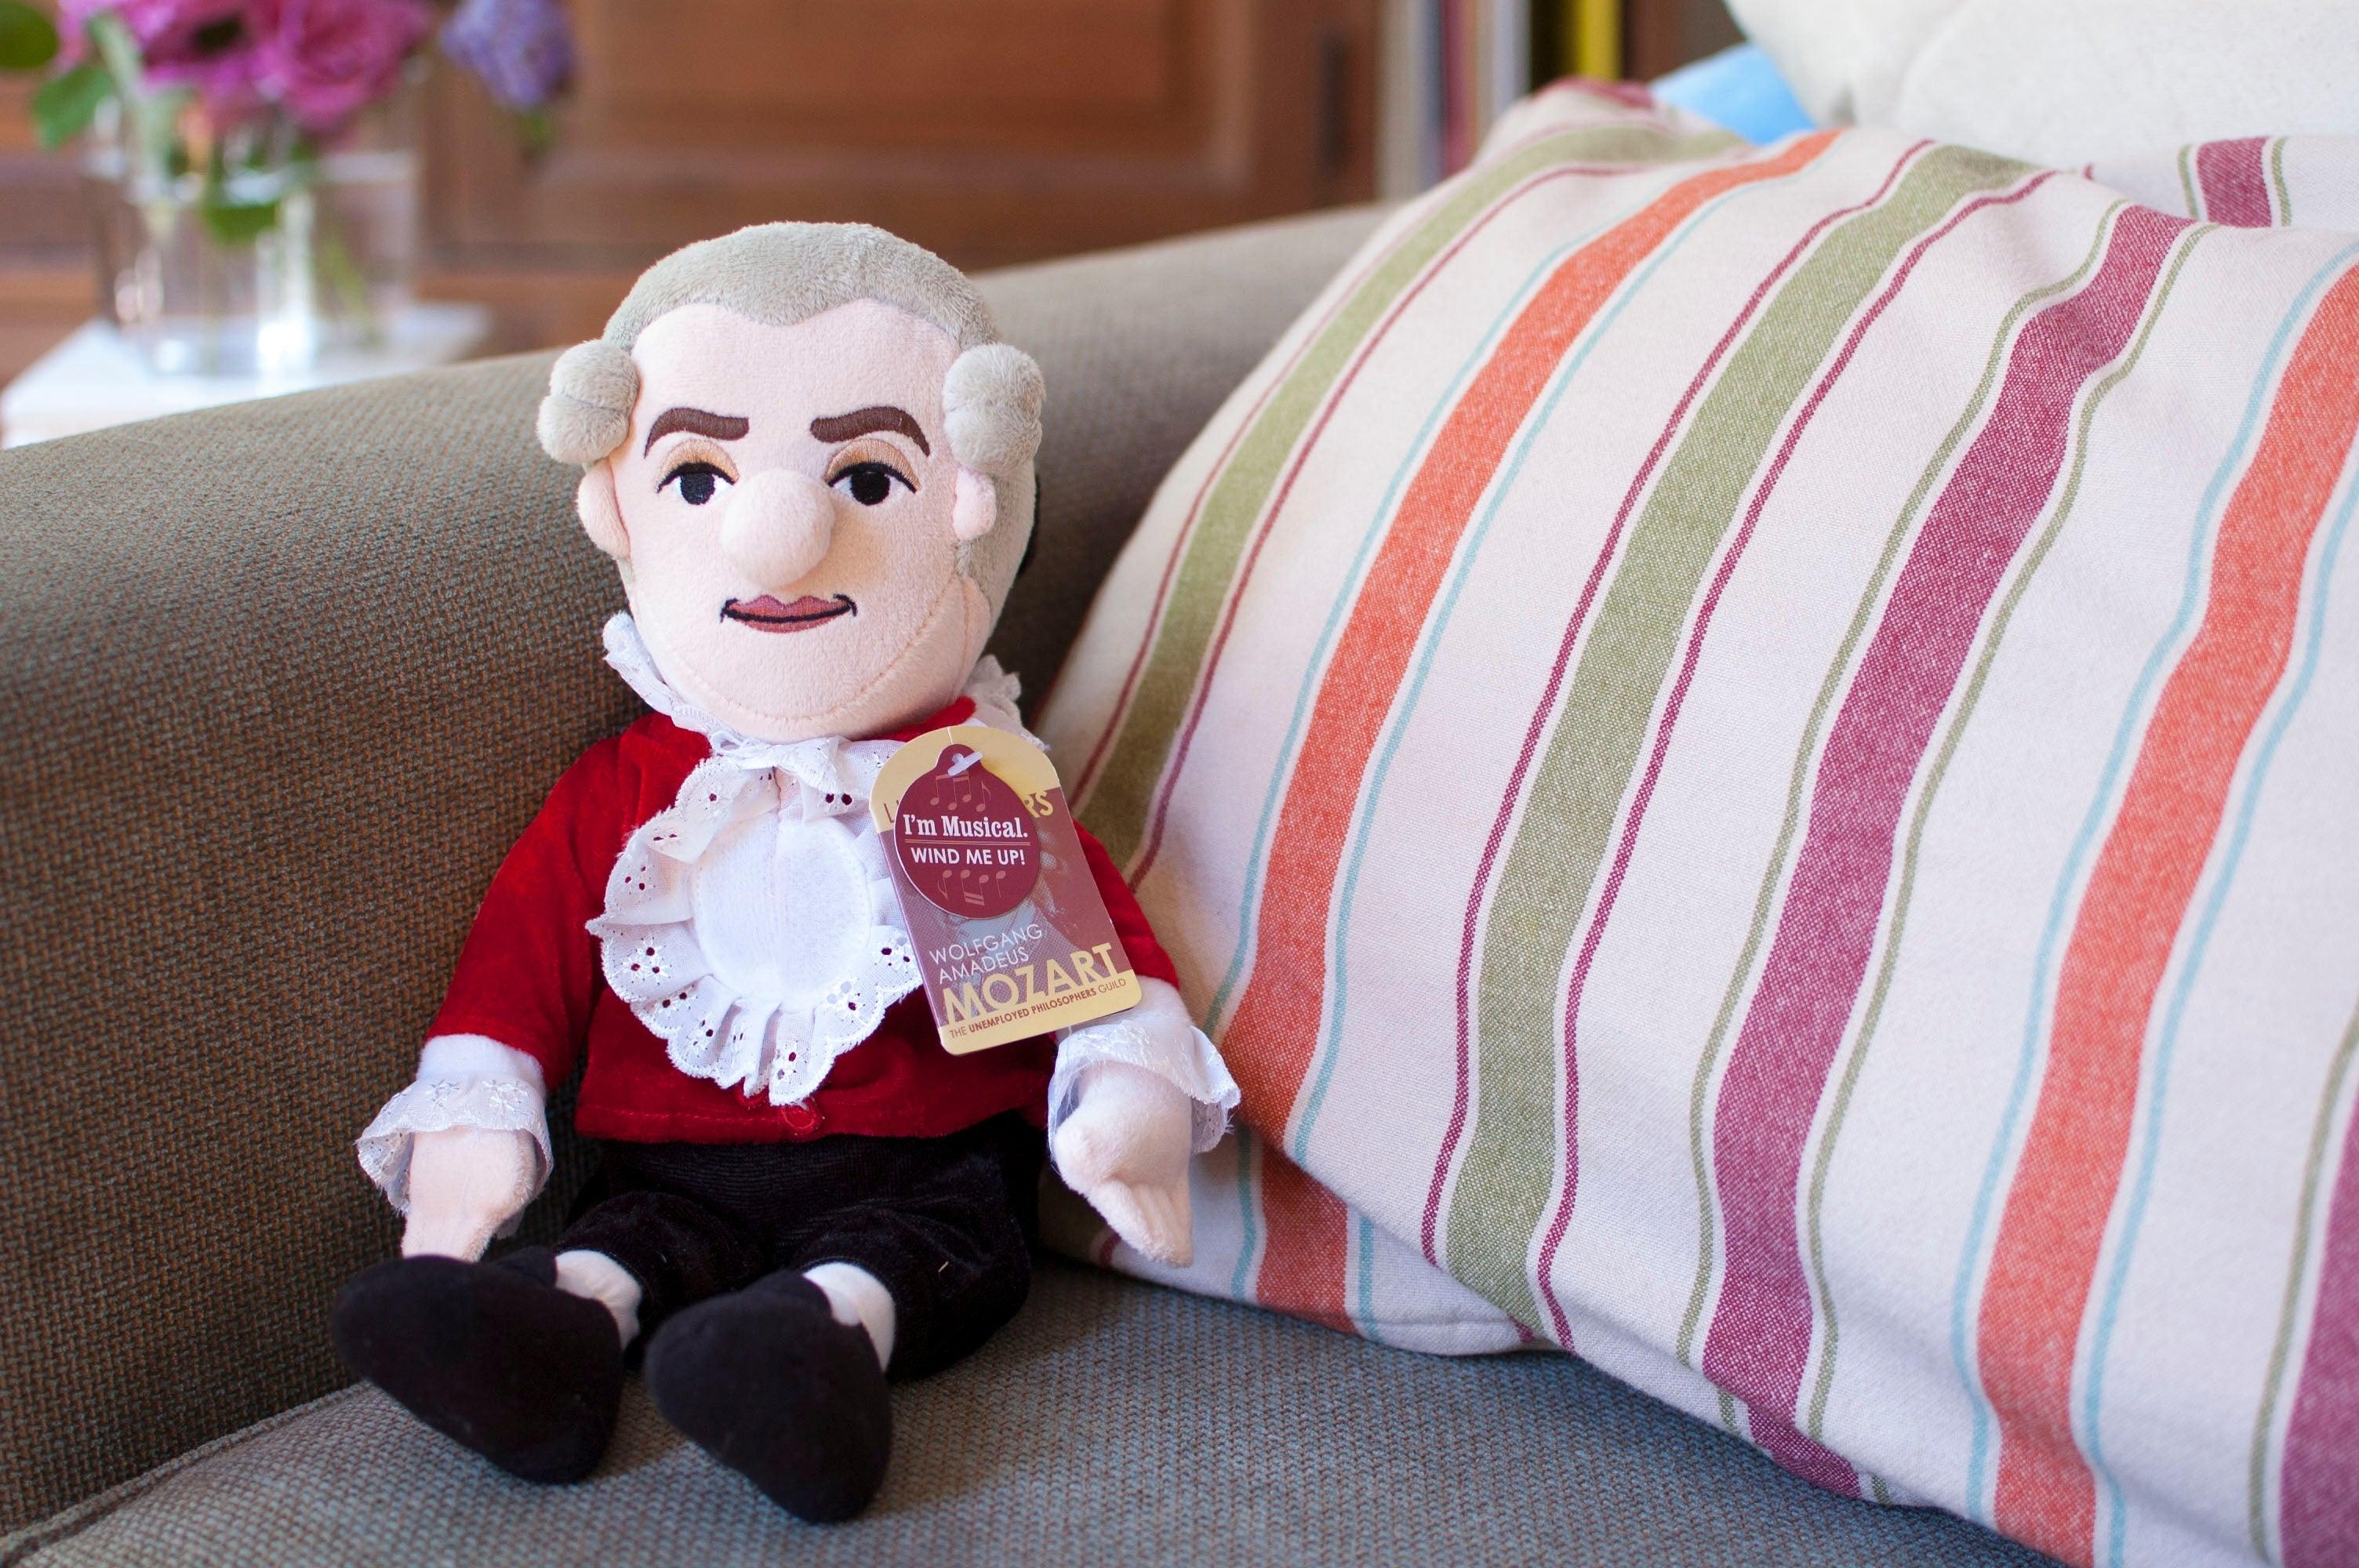 Product photo of Mozart Plush Doll, a novelty gift manufactured by The Unemployed Philosophers Guild.